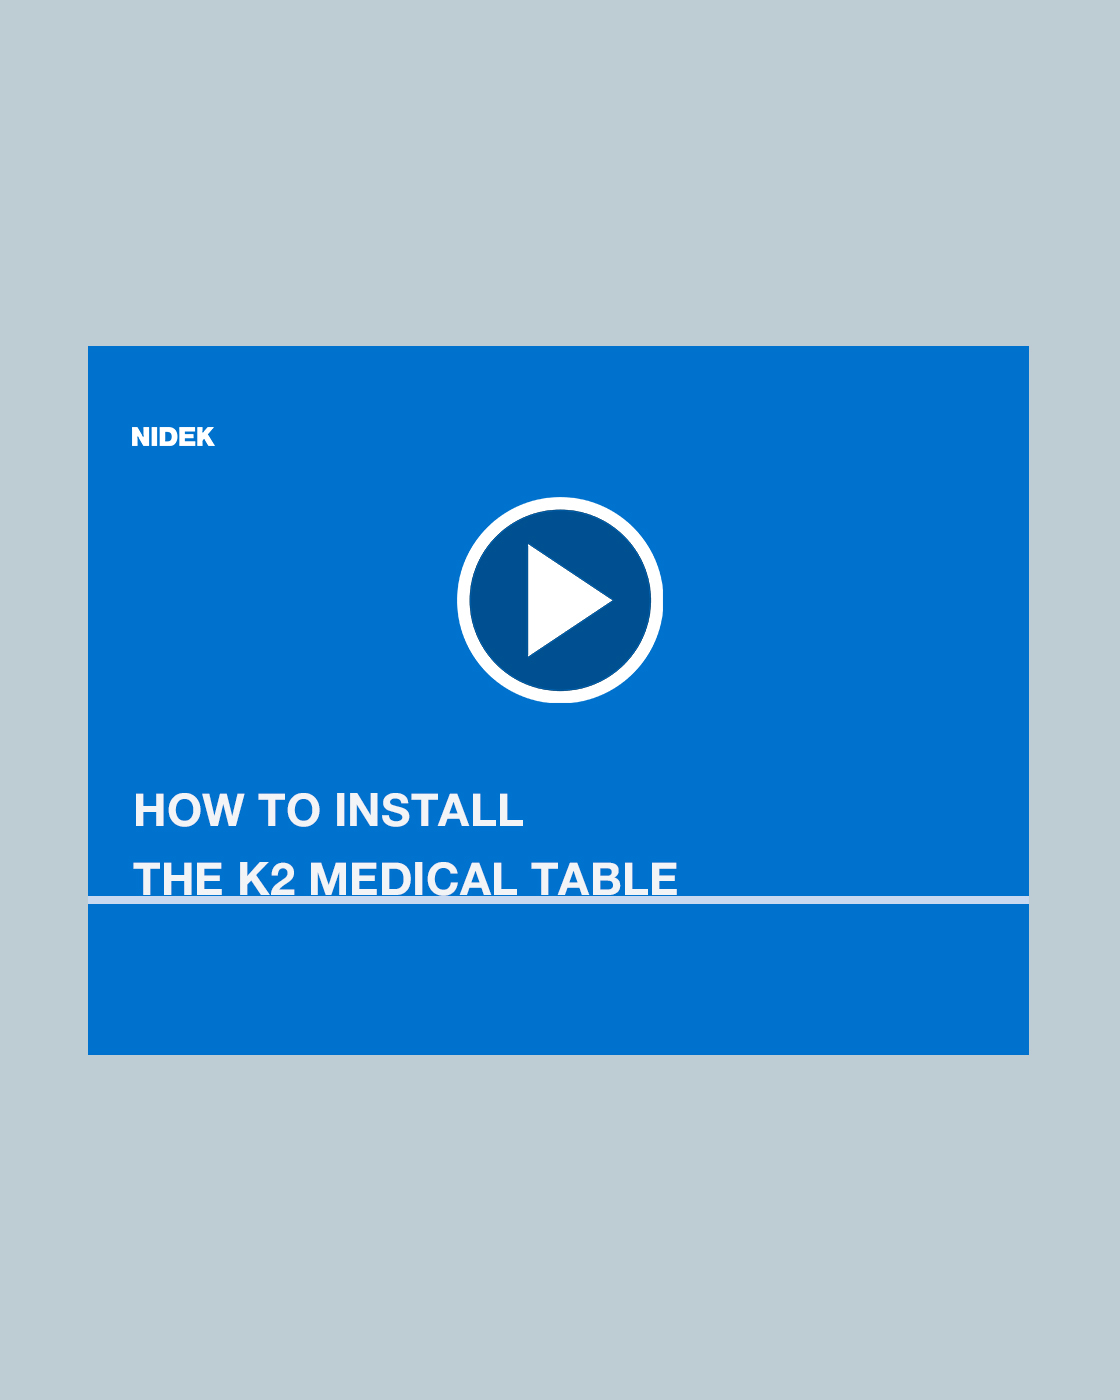 How to Install the K2 Medical Table